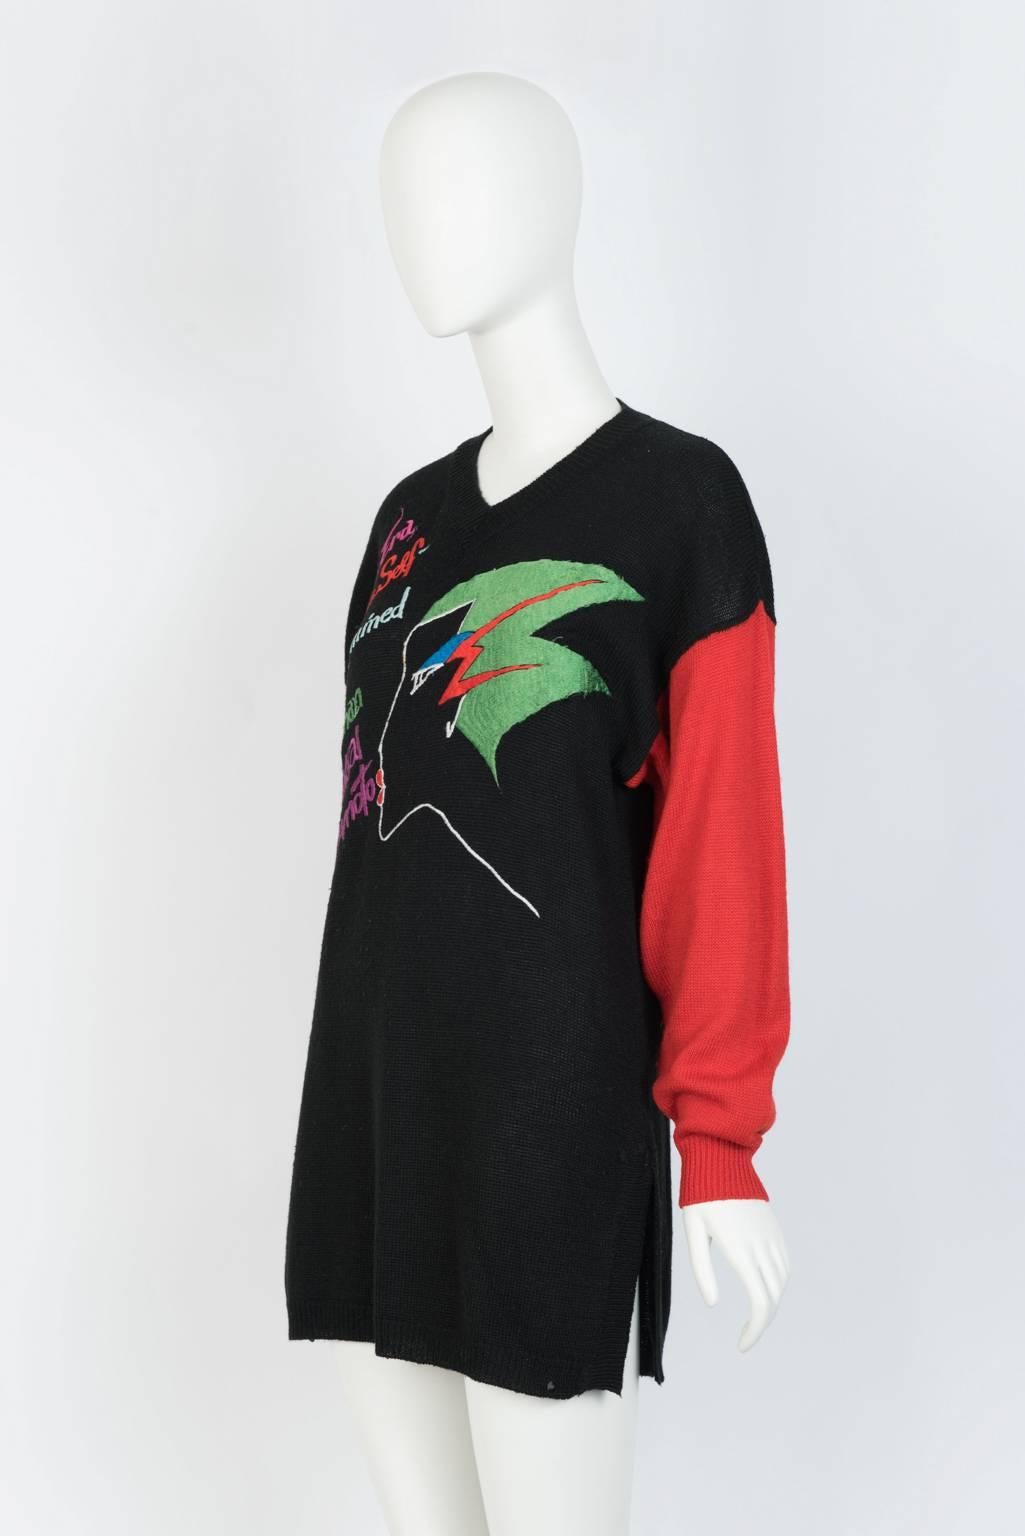 Embroidered, V-neck, wool blend sweater with cuff sleeve and side slit hem from the designer's late 80's series of statement knits. Text reads: 